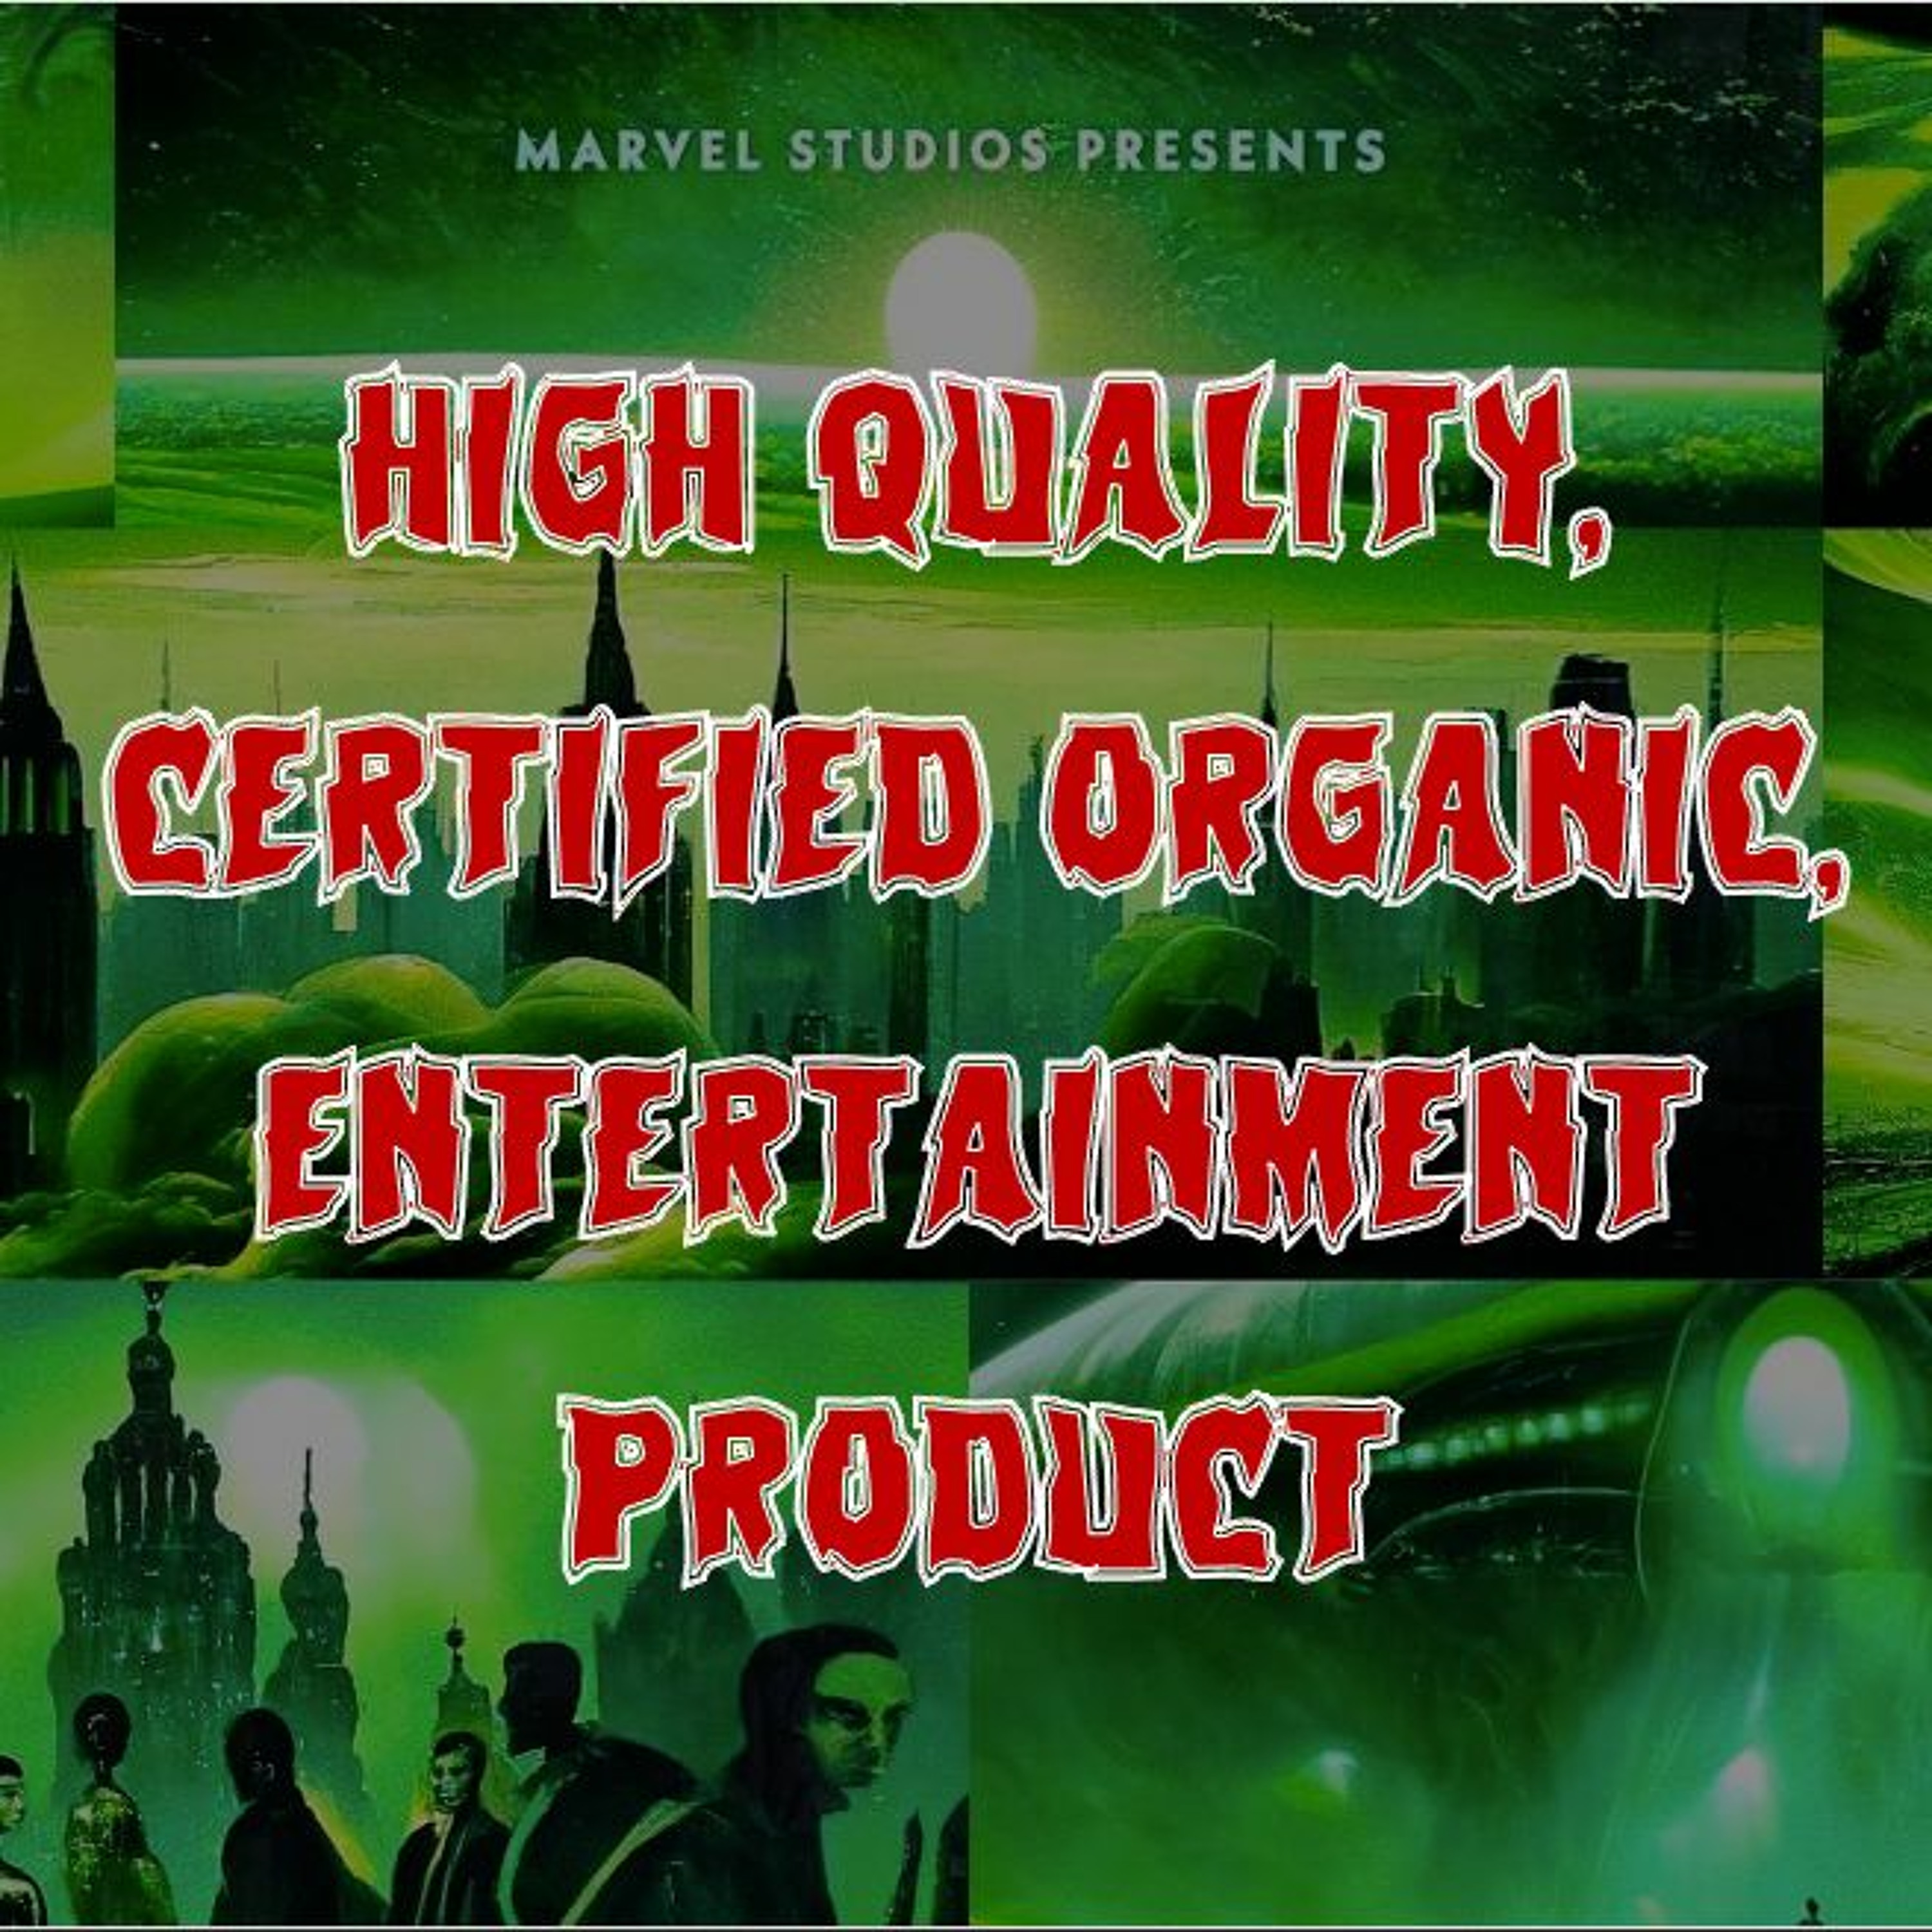 268. High Quality, Certified Organic, Entertainment Product